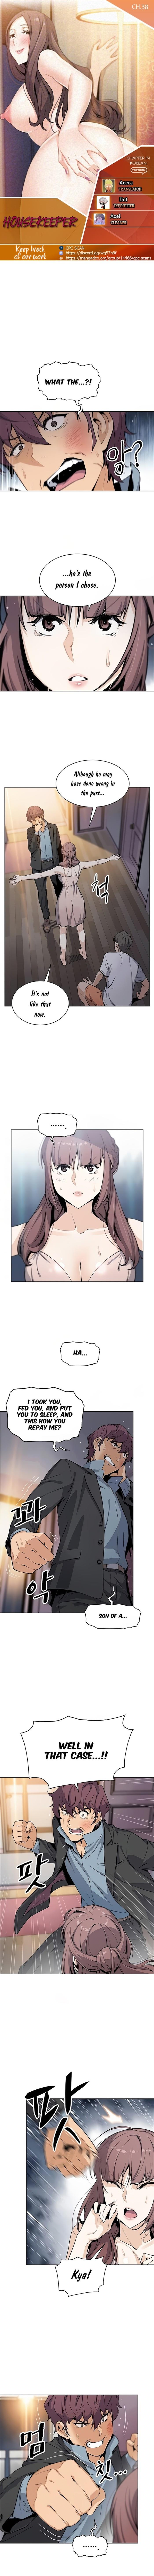 Housekeeper [Neck Pillow, Paper] Ch.49/49 [English] [Manhwa PDF] Completed 338